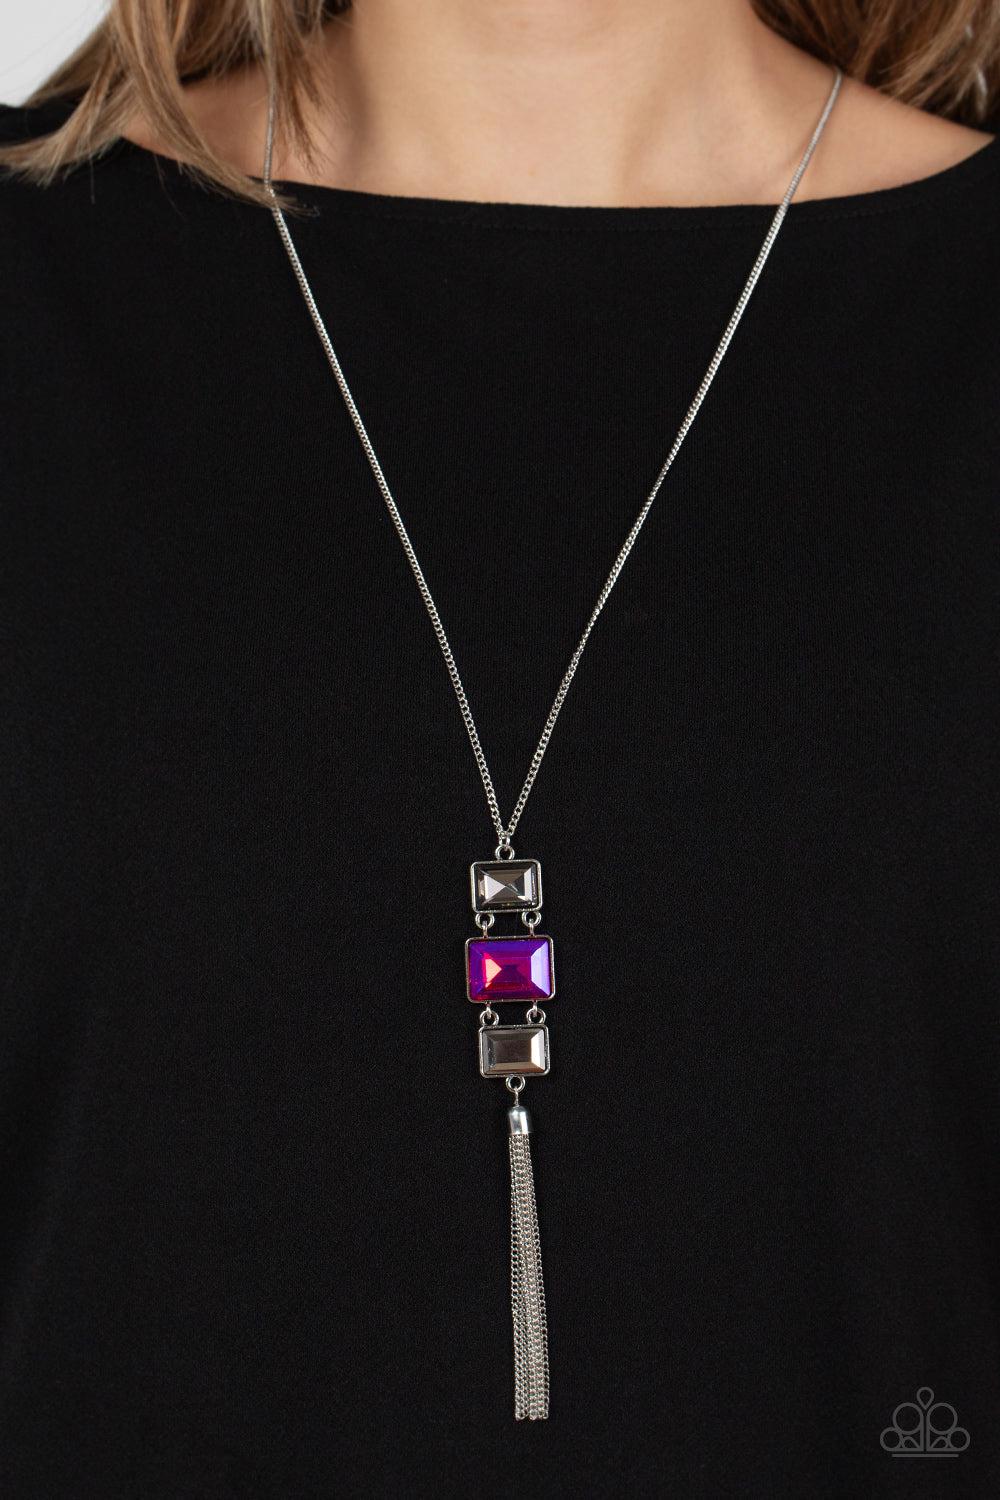 Uptown Totem Pink, Smoky and Hematite Necklace - Paparazzi Accessories-on model - CarasShop.com - $5 Jewelry by Cara Jewels